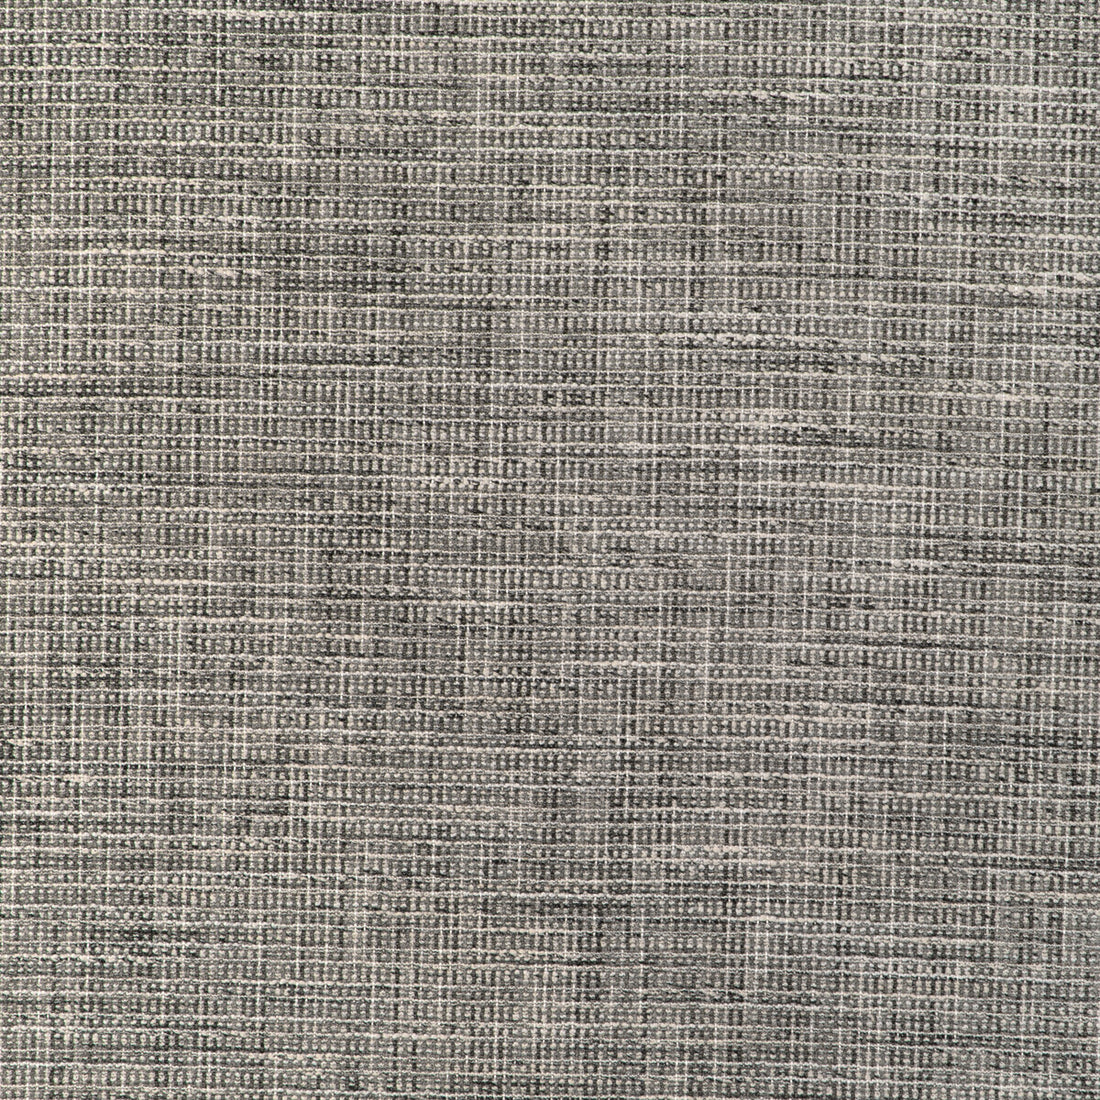 Kravet Design fabric in 37099-1101 color - pattern 37099.1101.0 - by Kravet Design in the Woven Colors collection